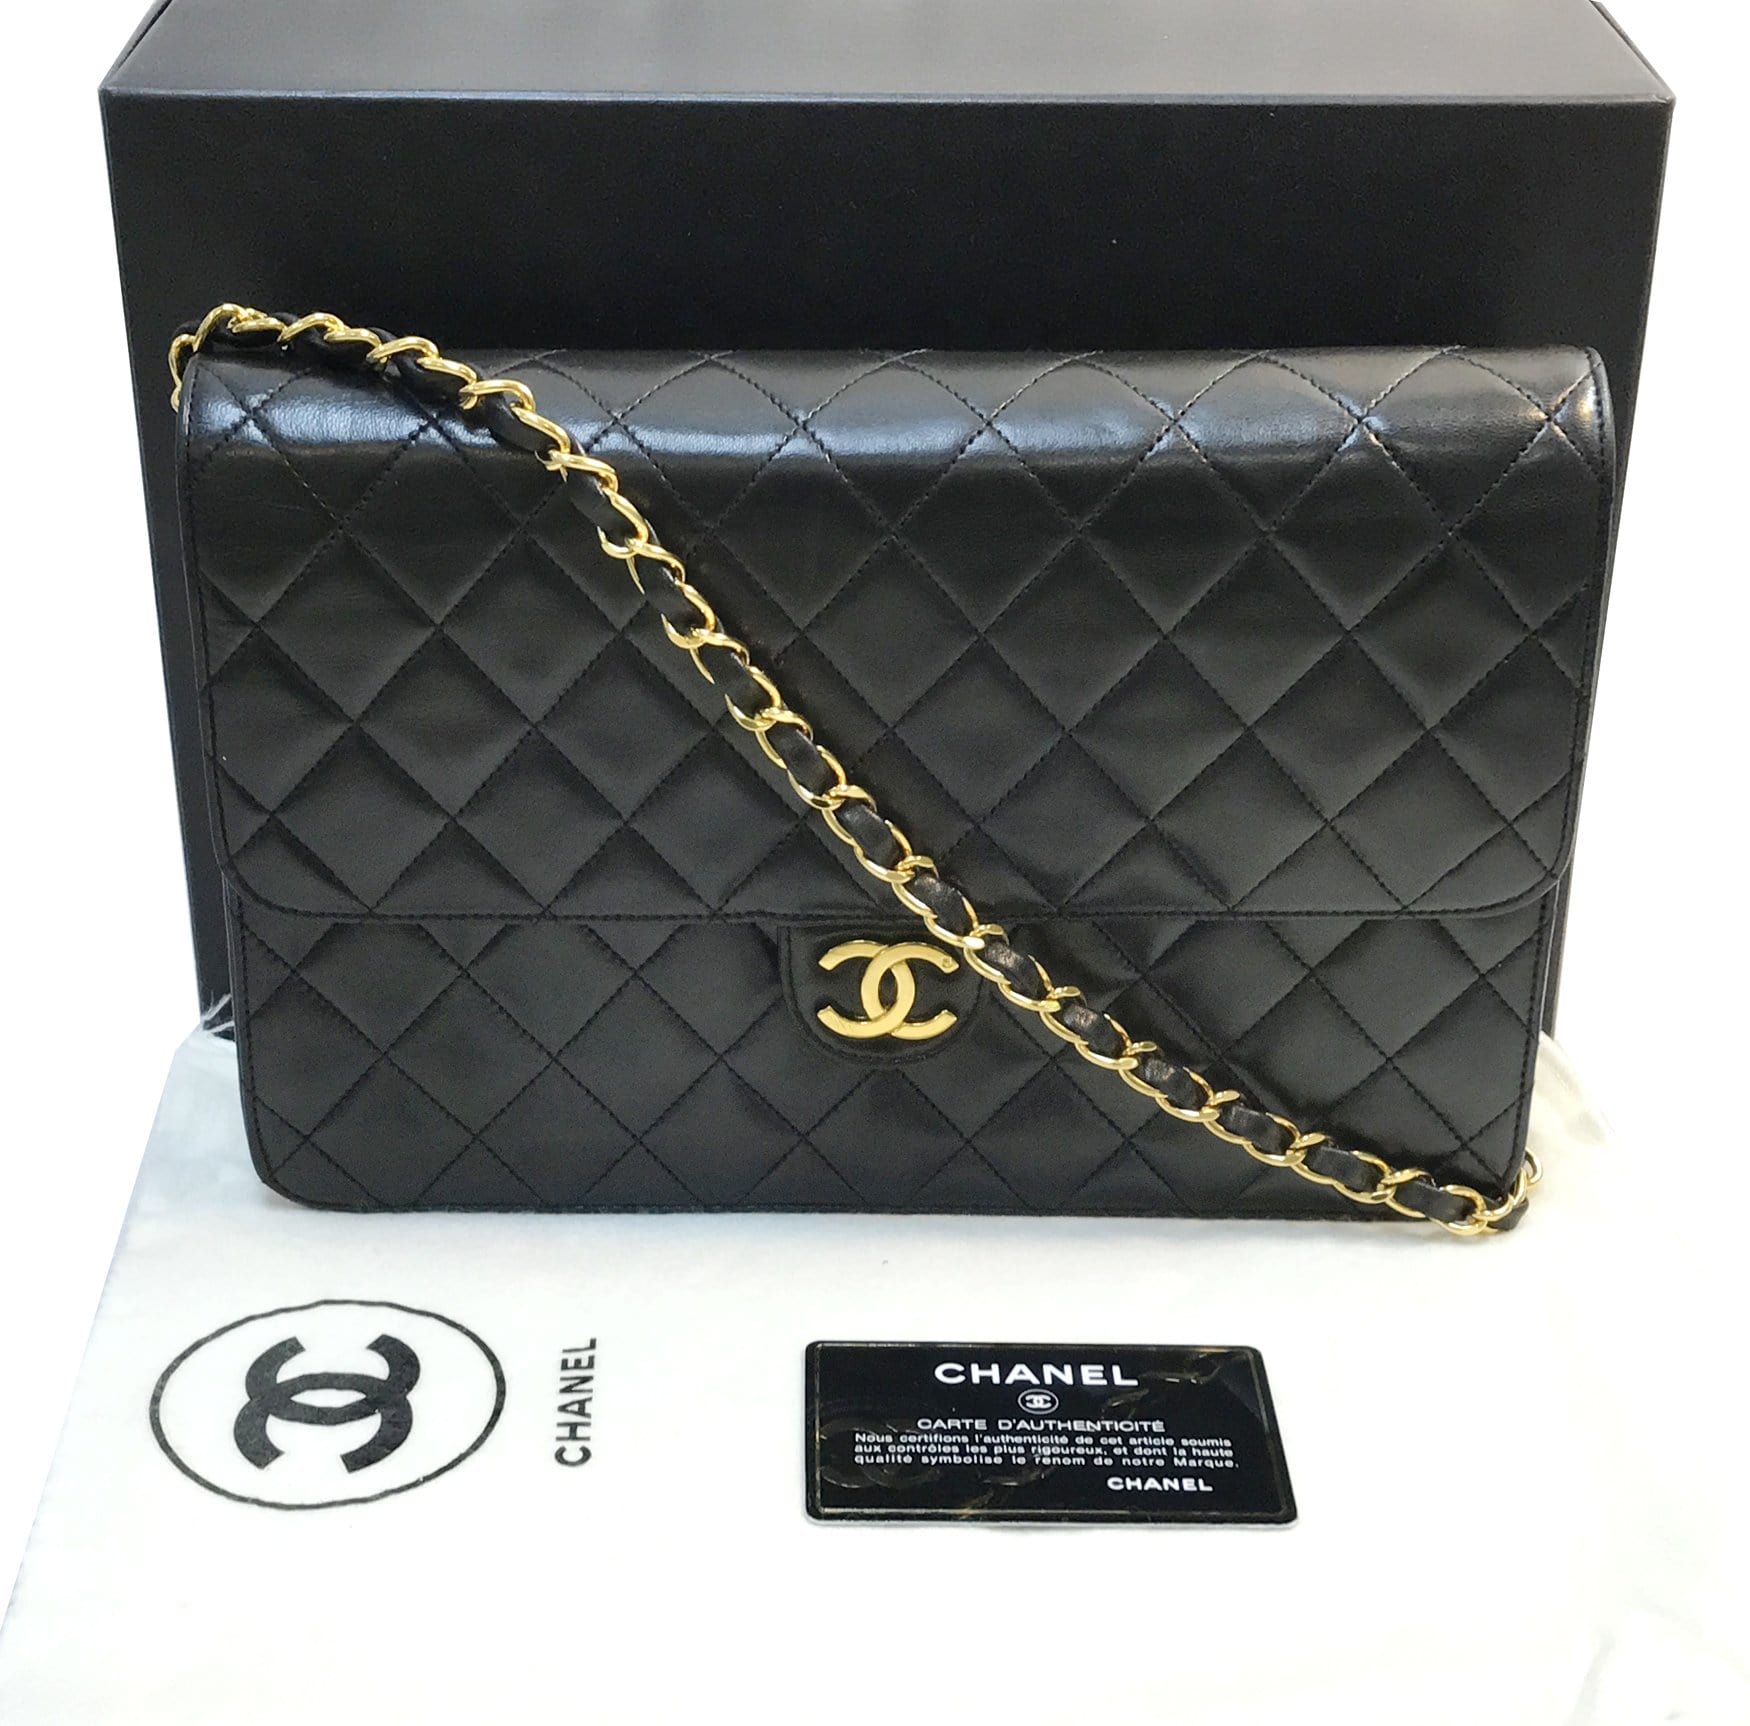 CHANEL Magnetic Small Bags & Handbags for Women